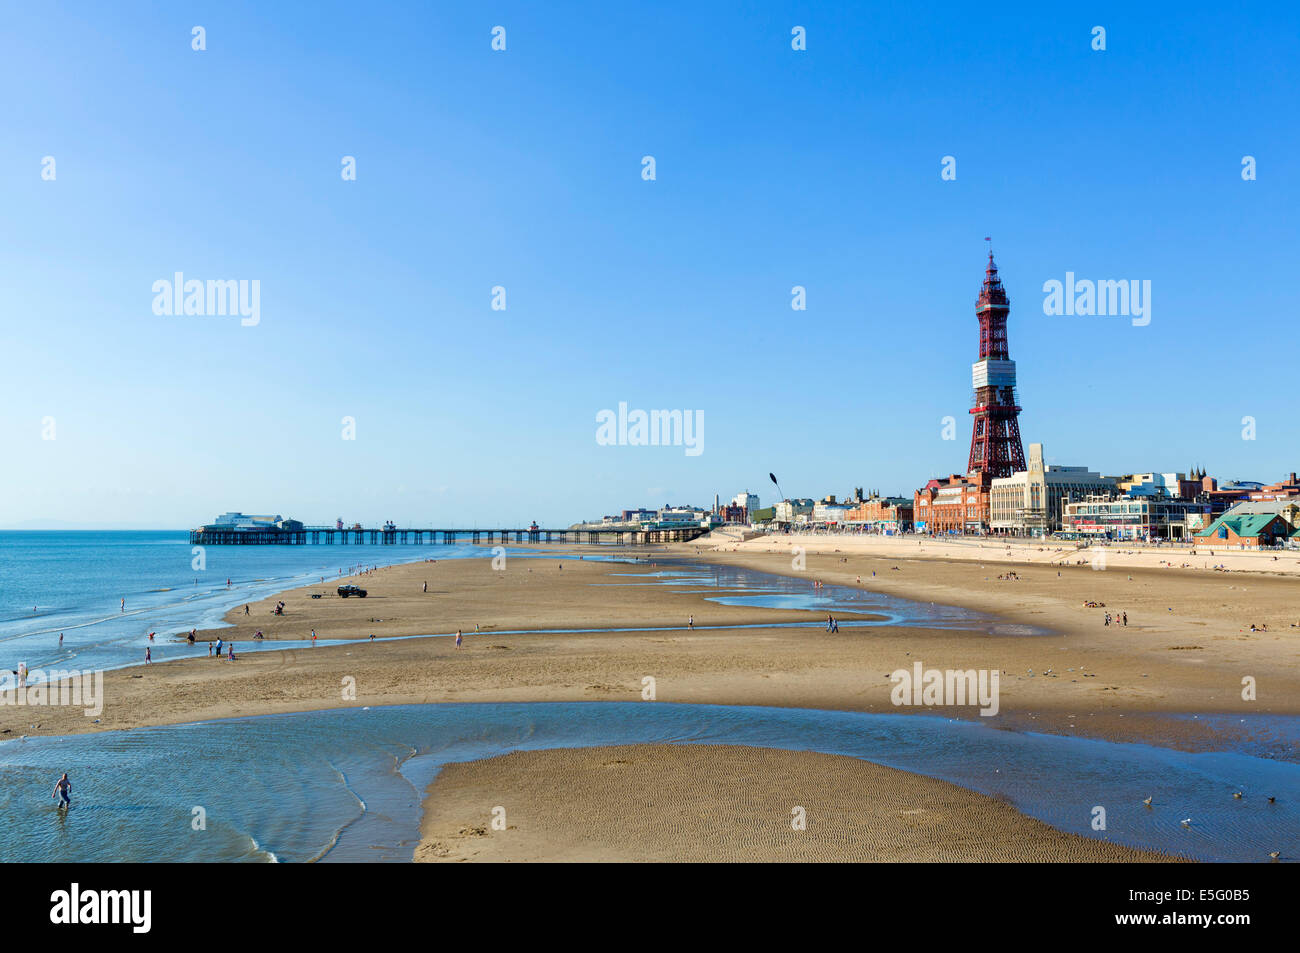 Beach in the late afternoon looking towards North Pier and Blackpool Tower, The Golden Mile, Blackpool, Lancashire, UK Stock Photo